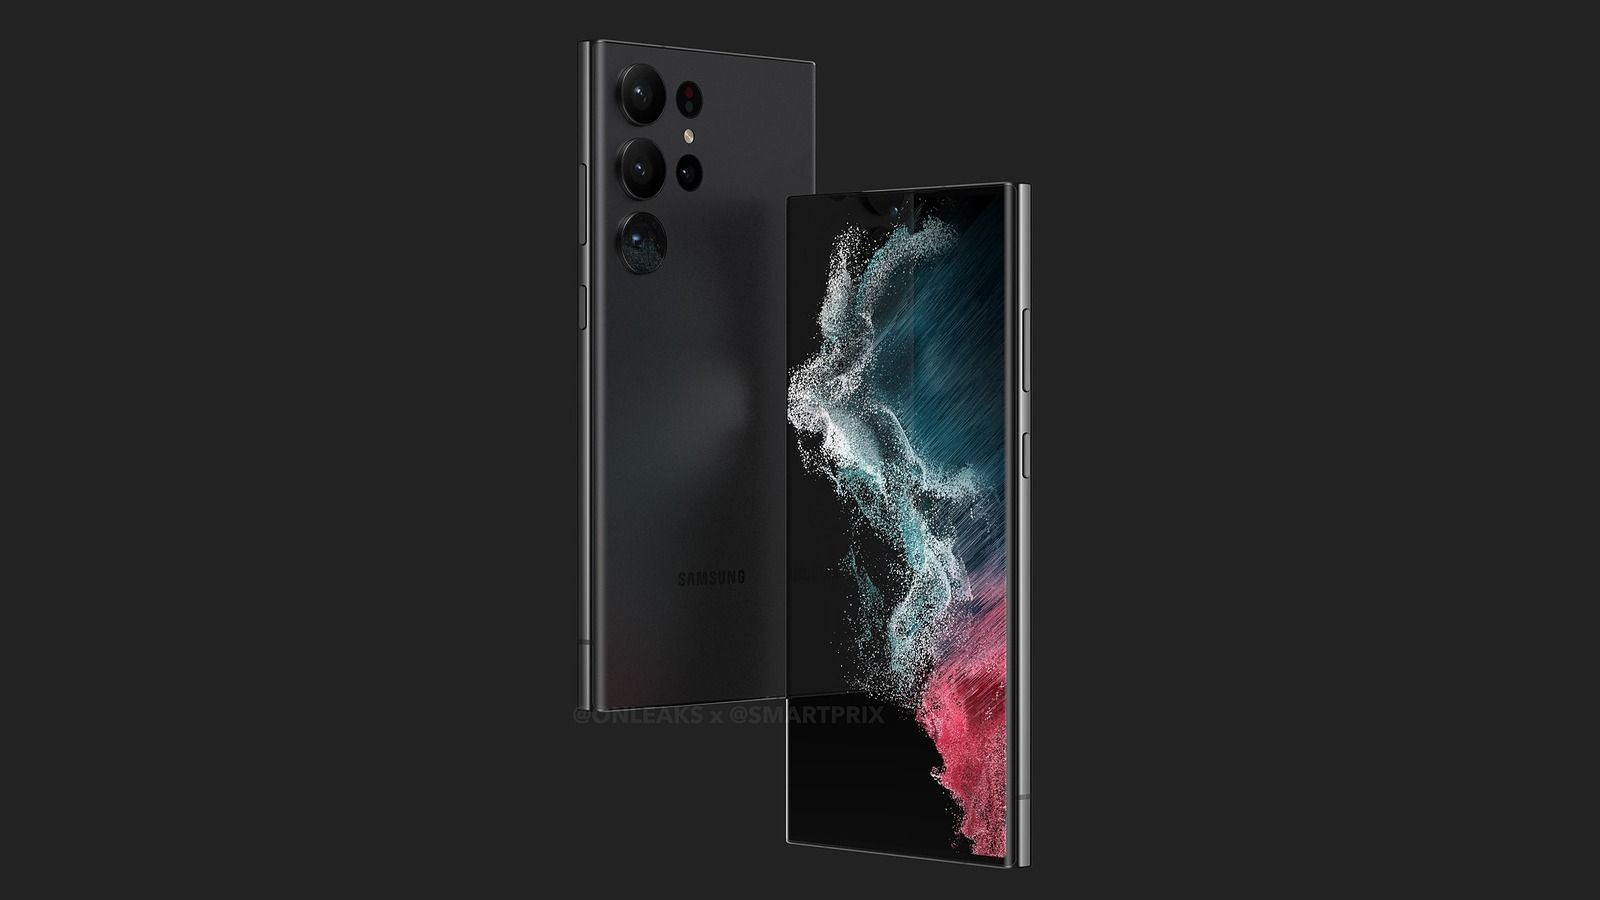 A render of the front and back of a phone on a black background